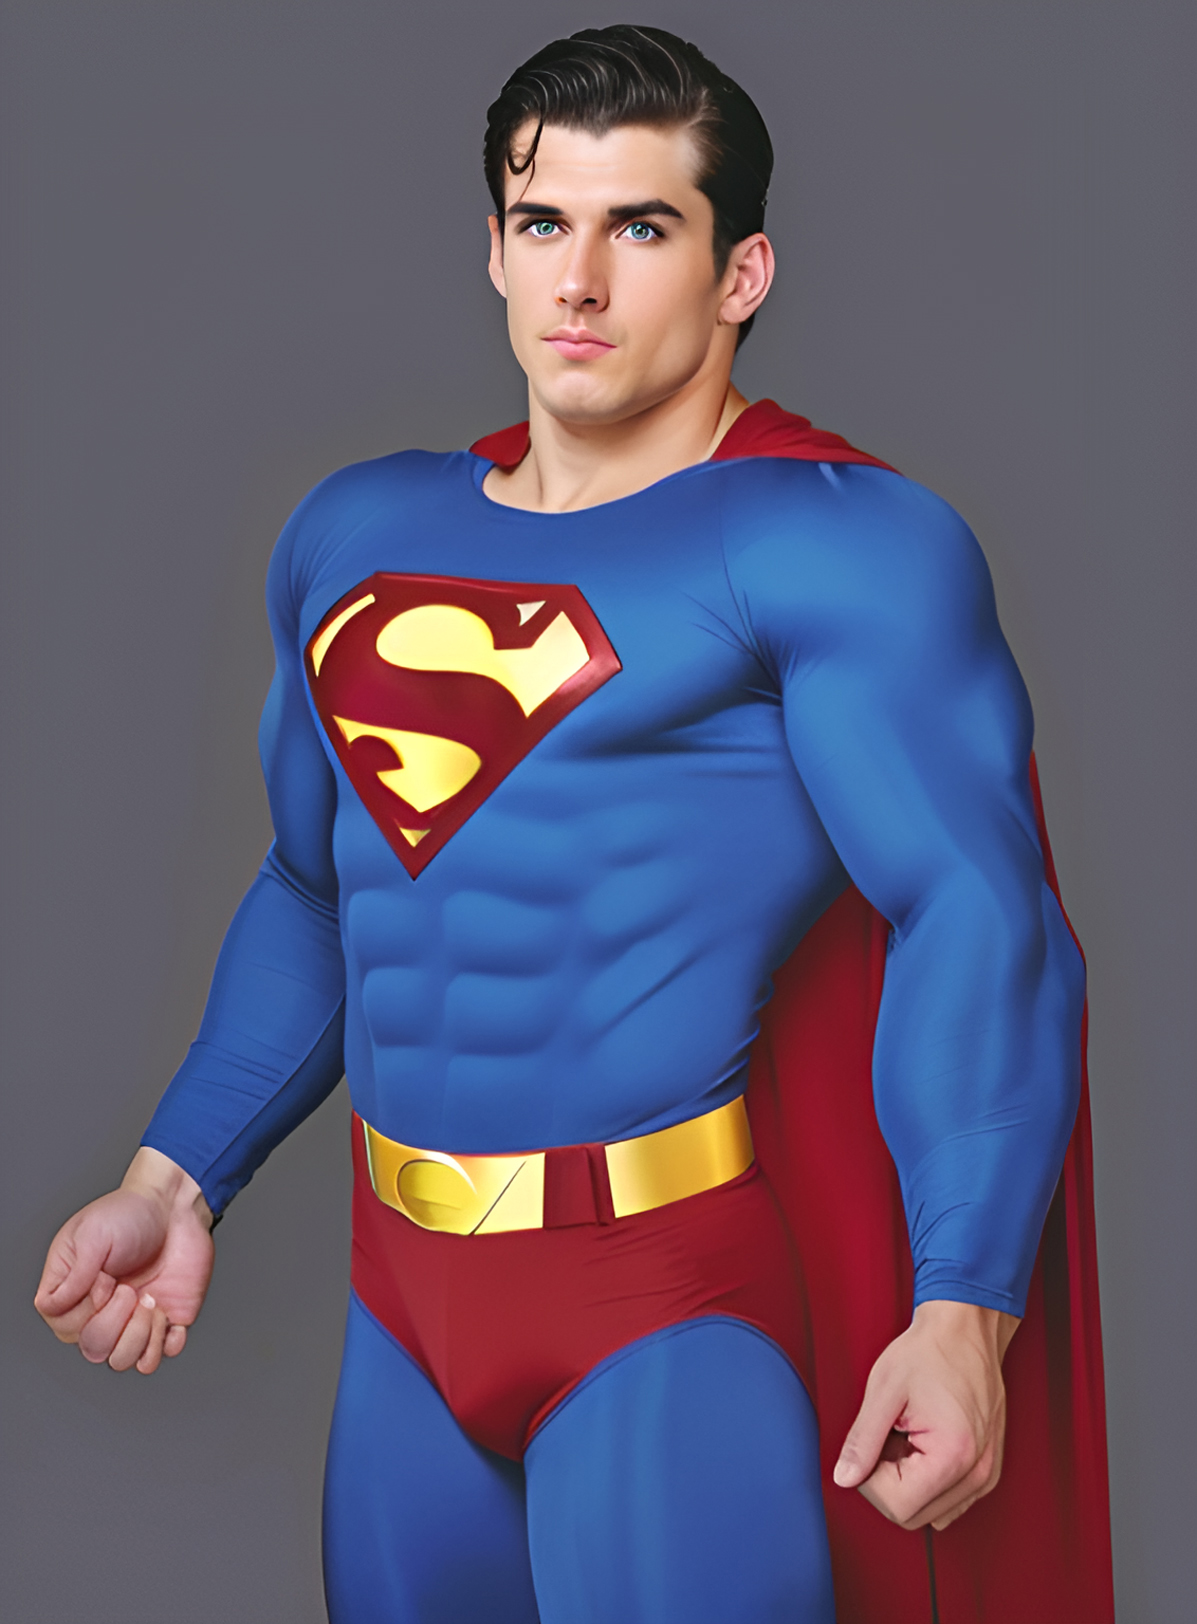 Real life DC models - Superman1 by Tazzieraye on DeviantArt